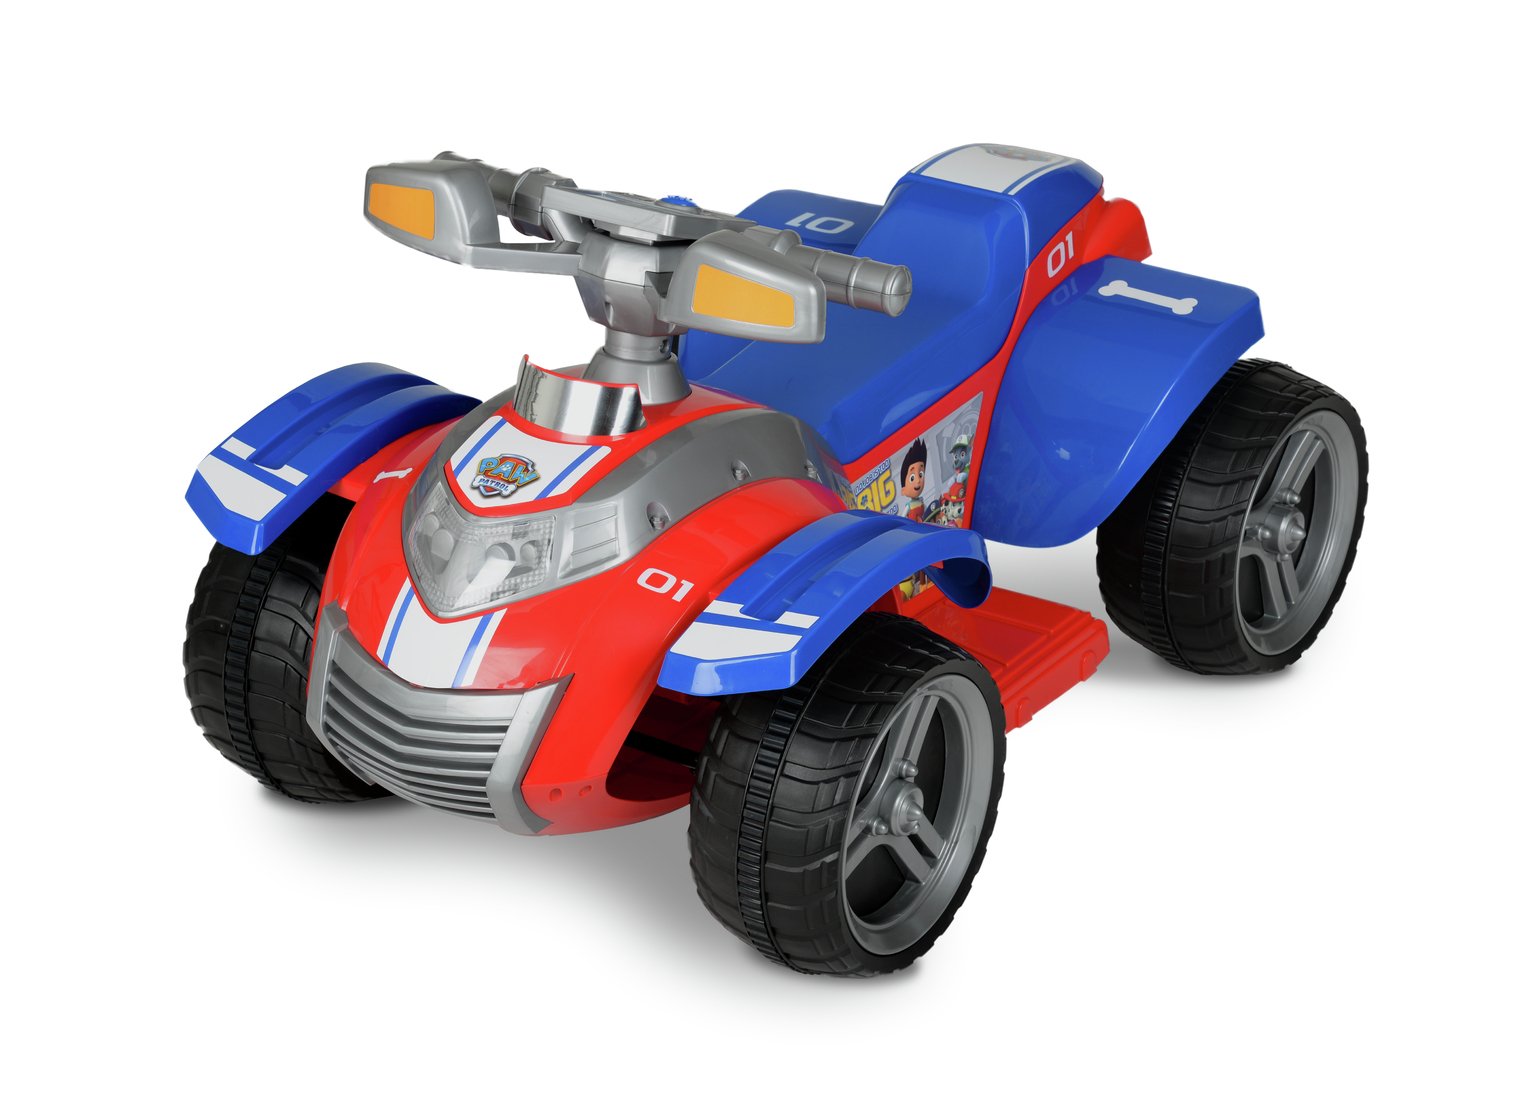 Paw Patrol 6V Electric Ride-on Review